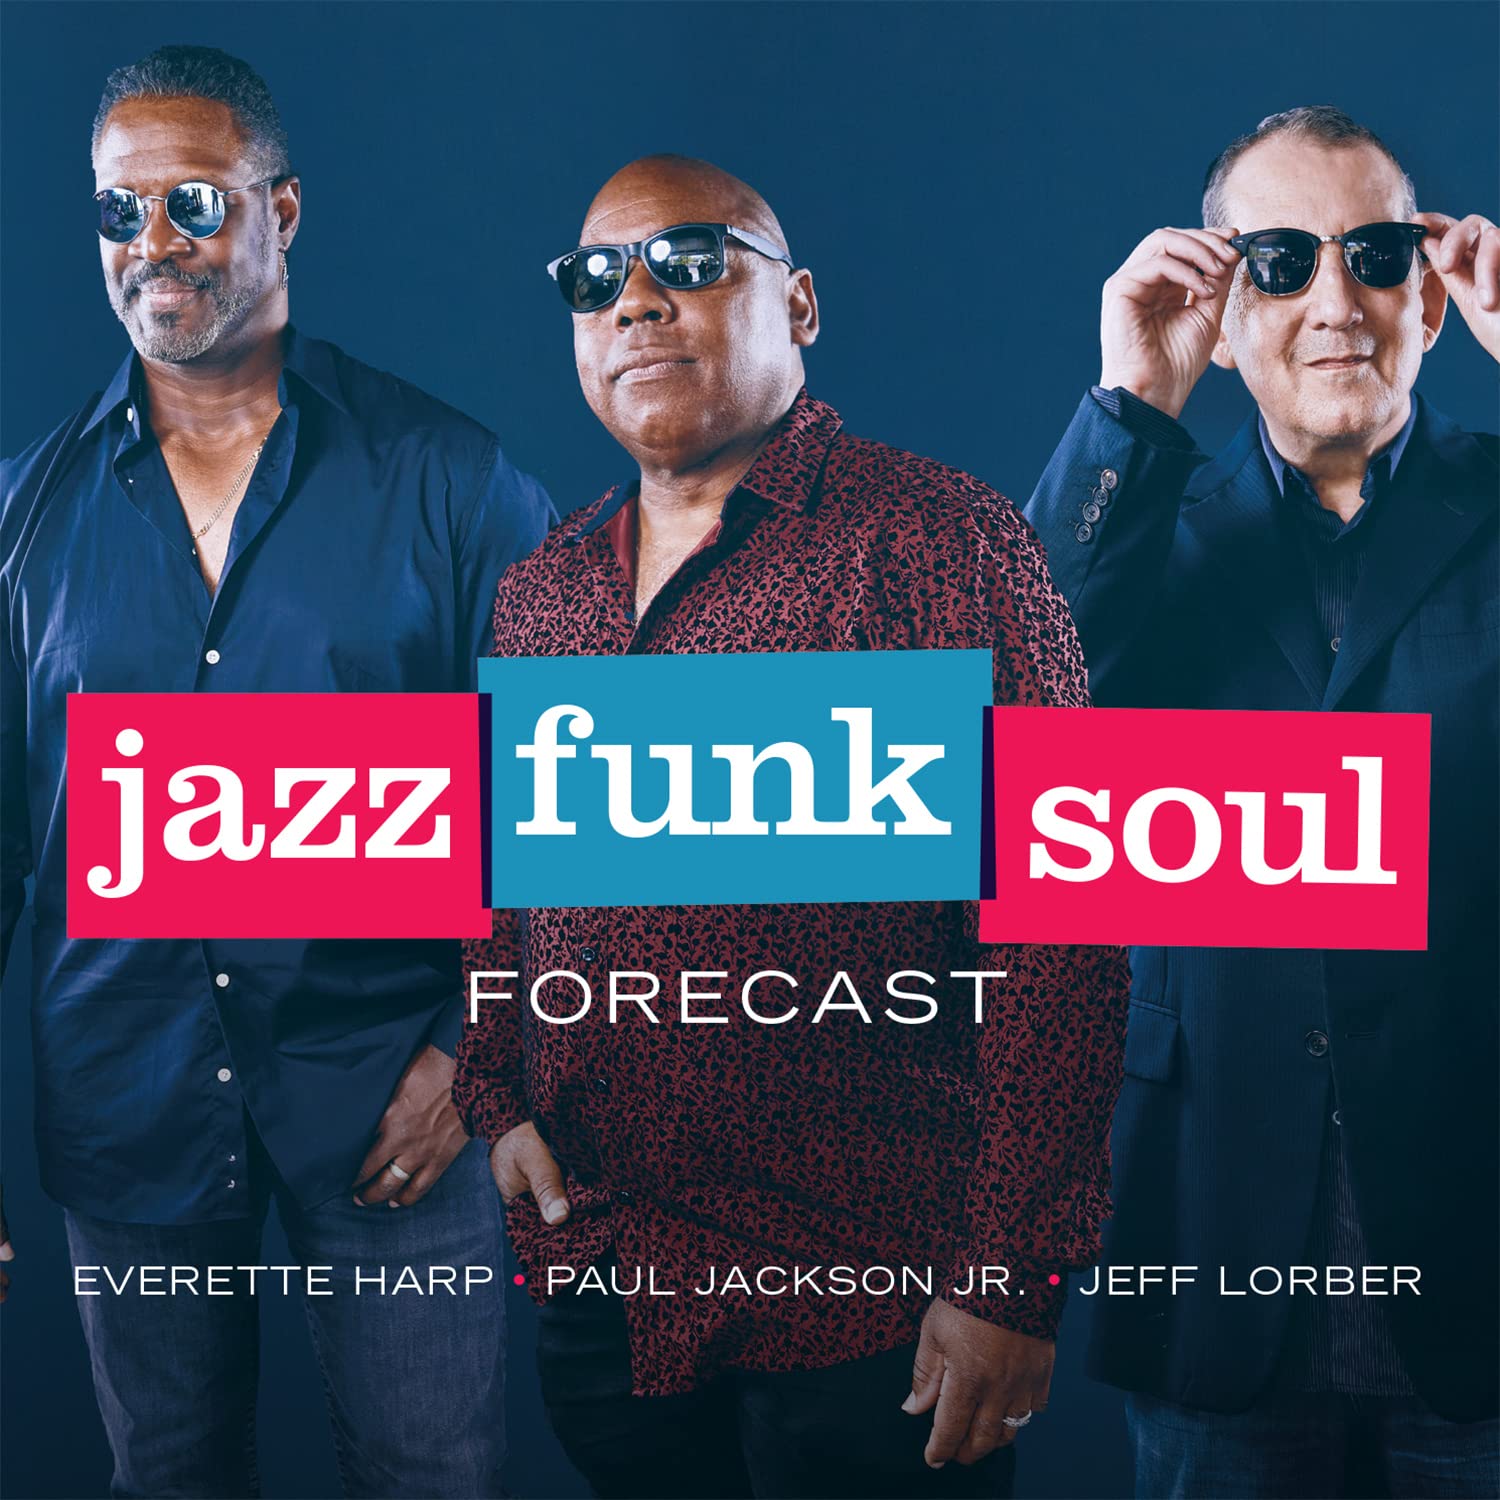 JAZZ FUNK SOUL - Forecast cover 